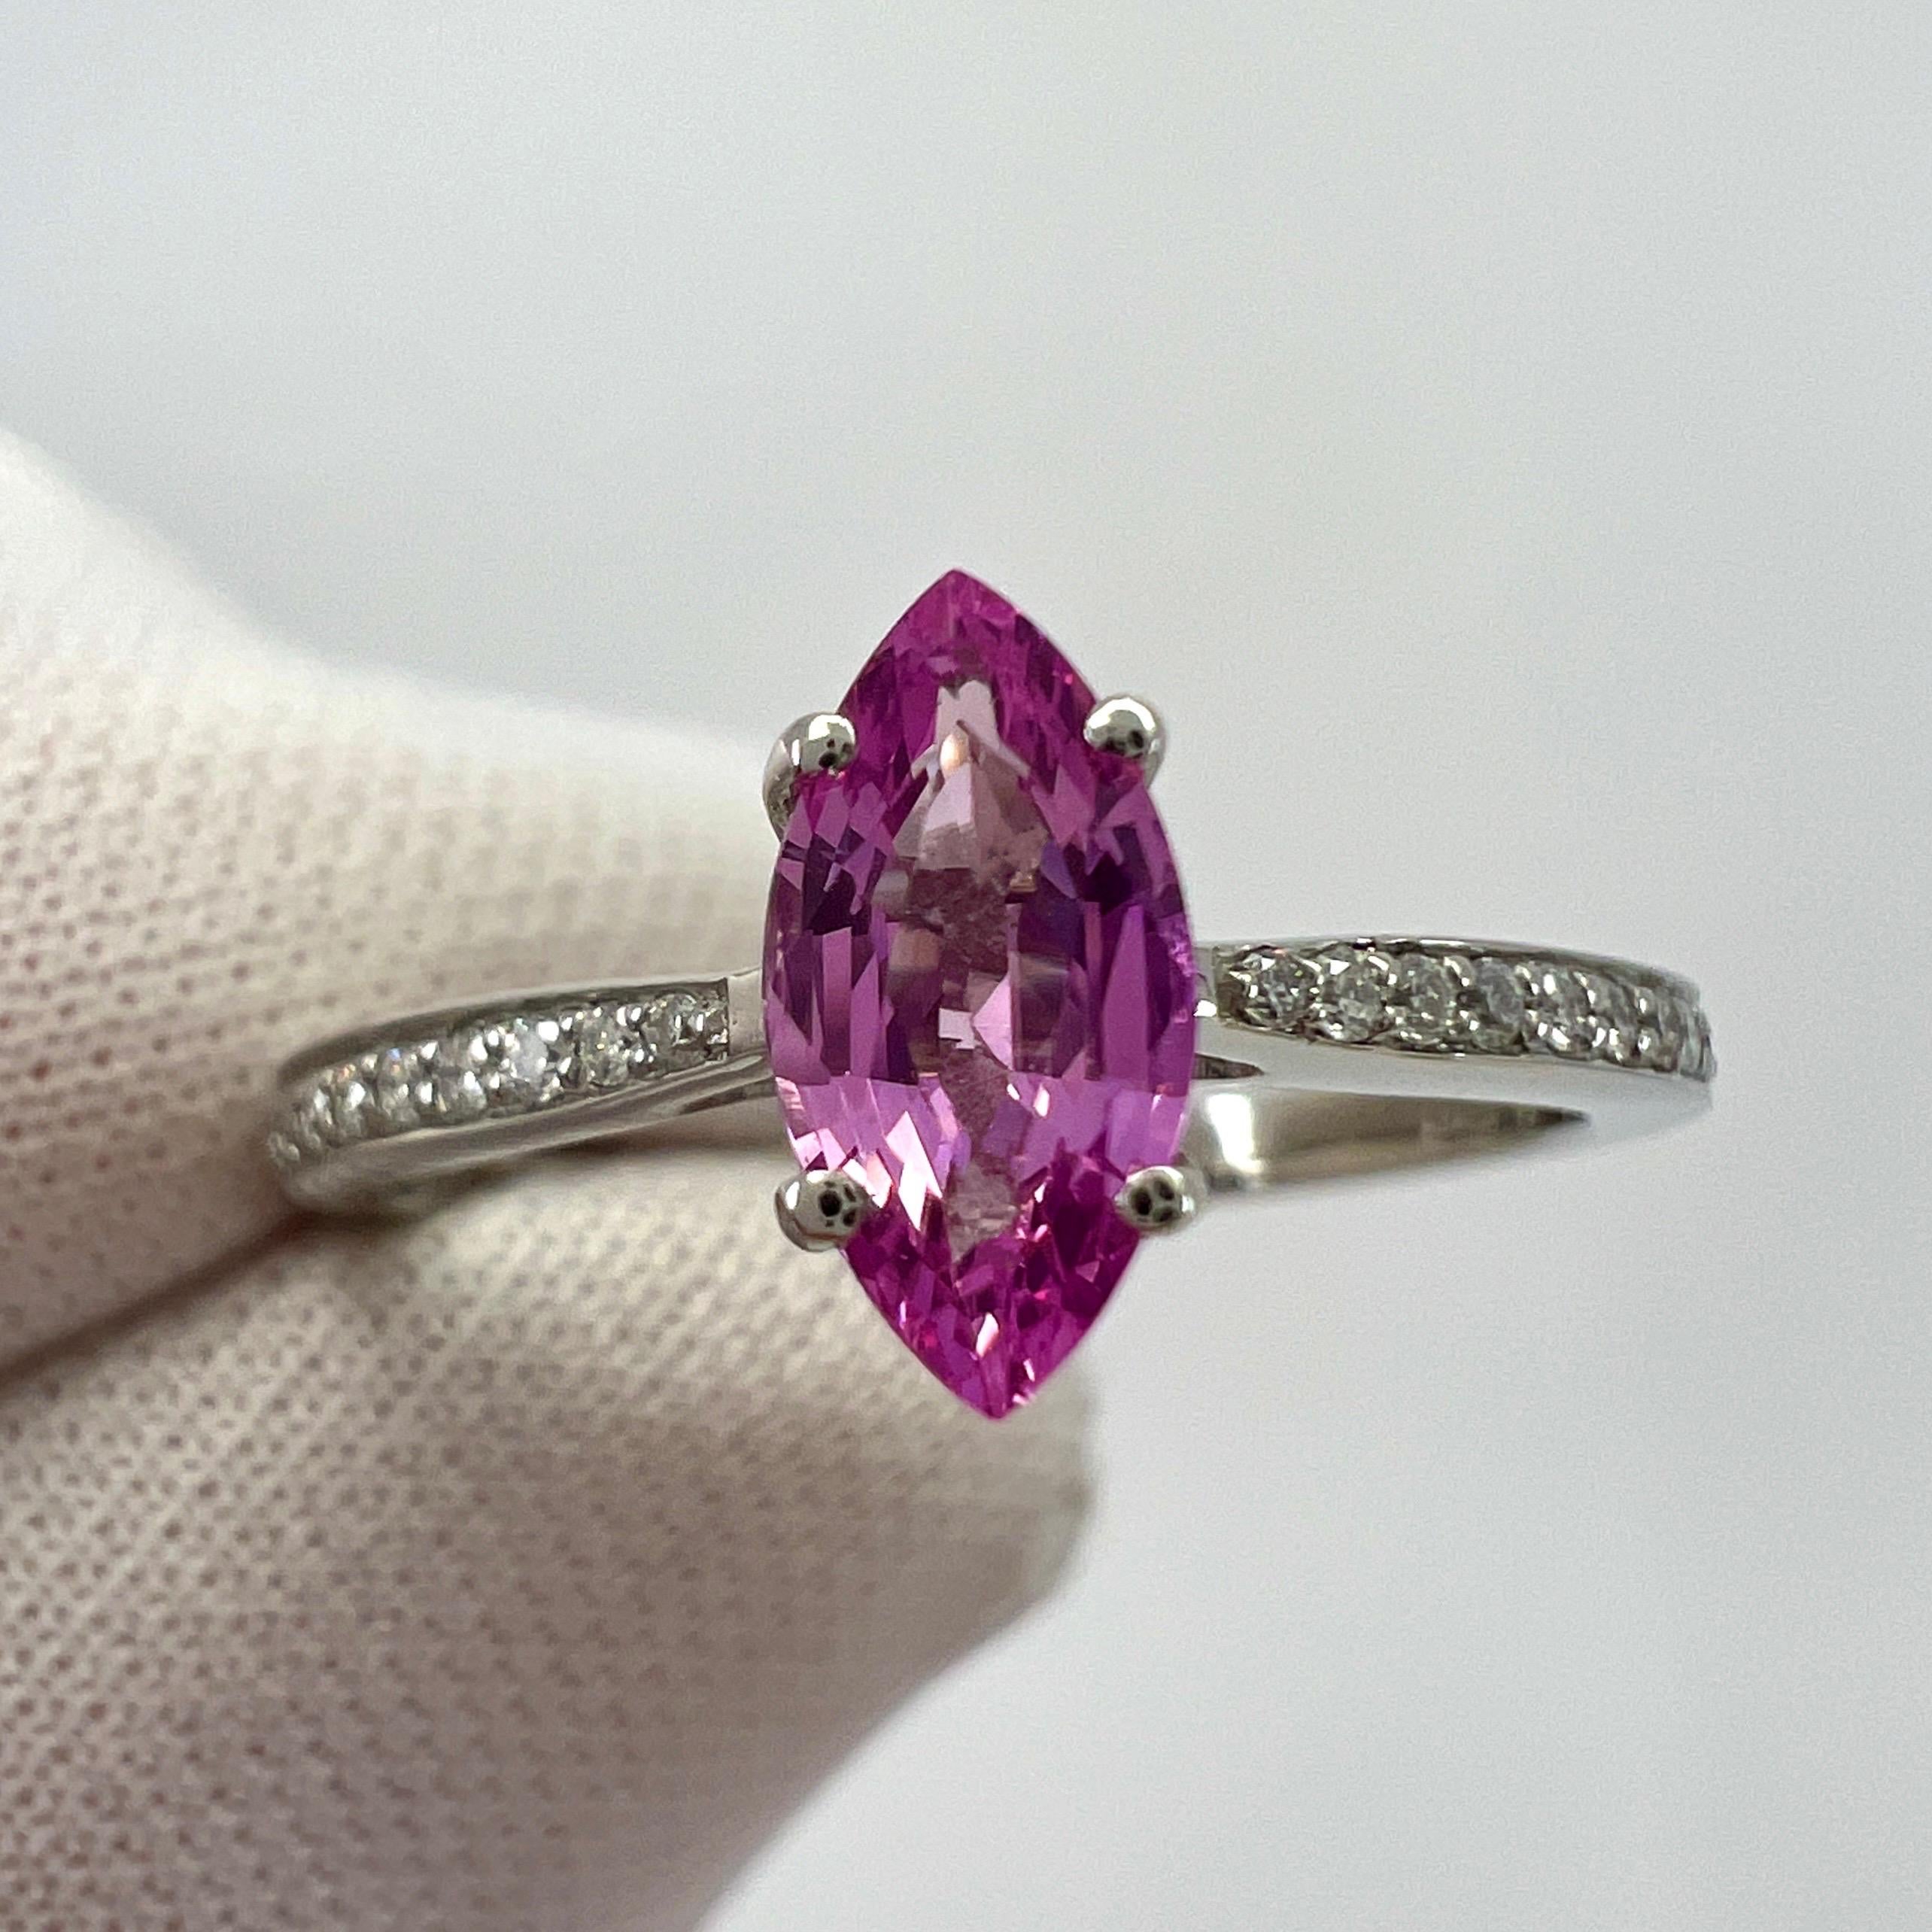 Fine Vivid Pink Ceylon Sapphire And Diamond Marquise Cut Platinum Solitaire Ring. 0.68 Total carat weight.

Stunning 0.58 carat sapphire with a fine vivid pink colour and an excellent marquise/navette cut. Measuring just over 8x4mm.
The sapphire has